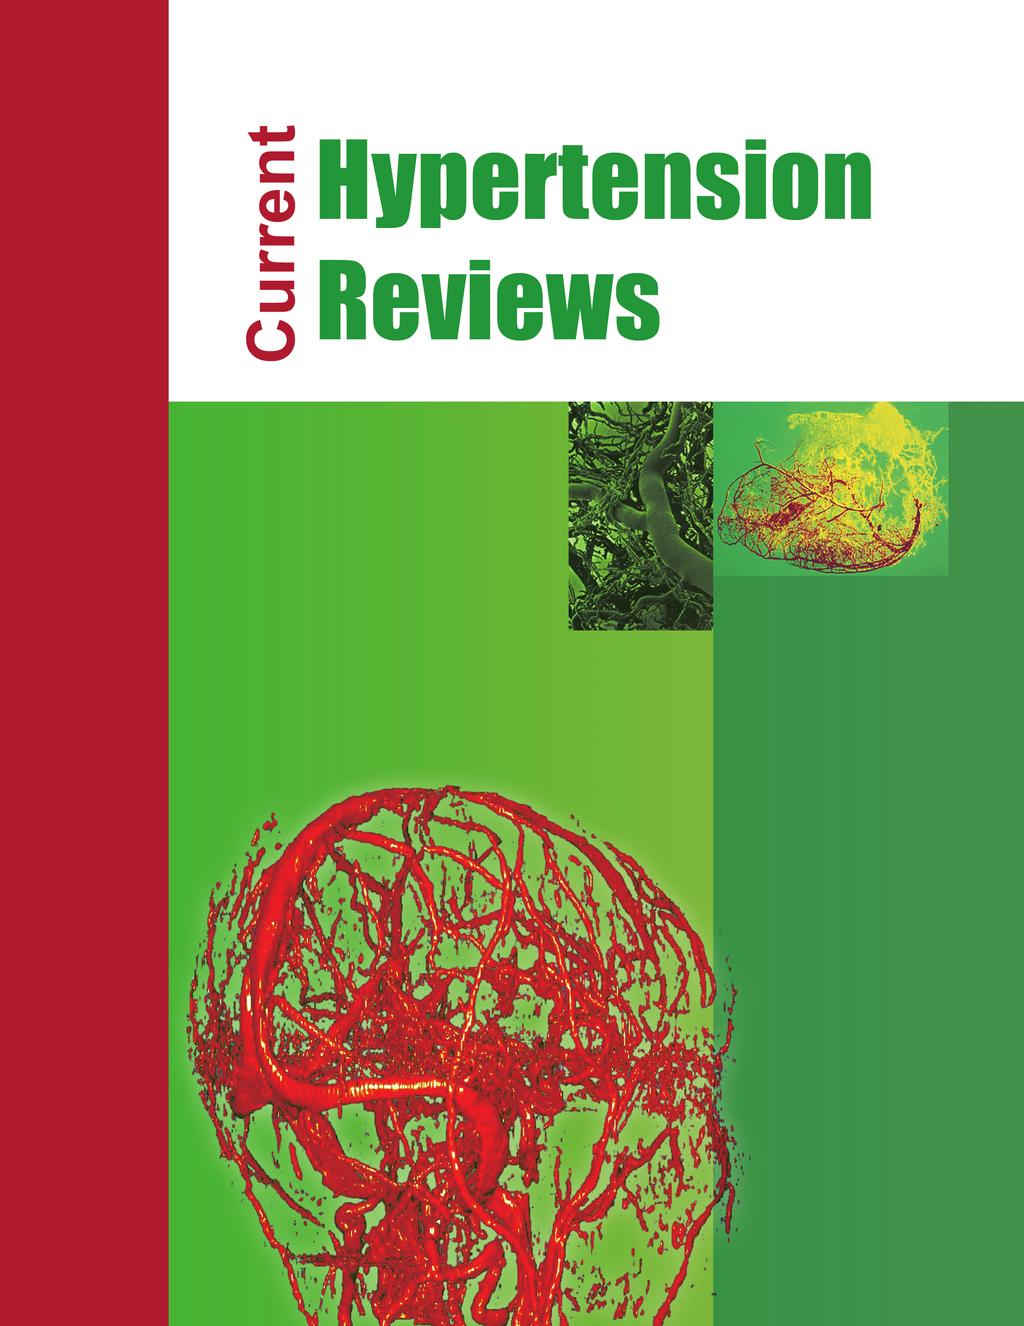 Current Hypertension Reviews 66 Send Orders for Reprints to reprints@benthamscience.